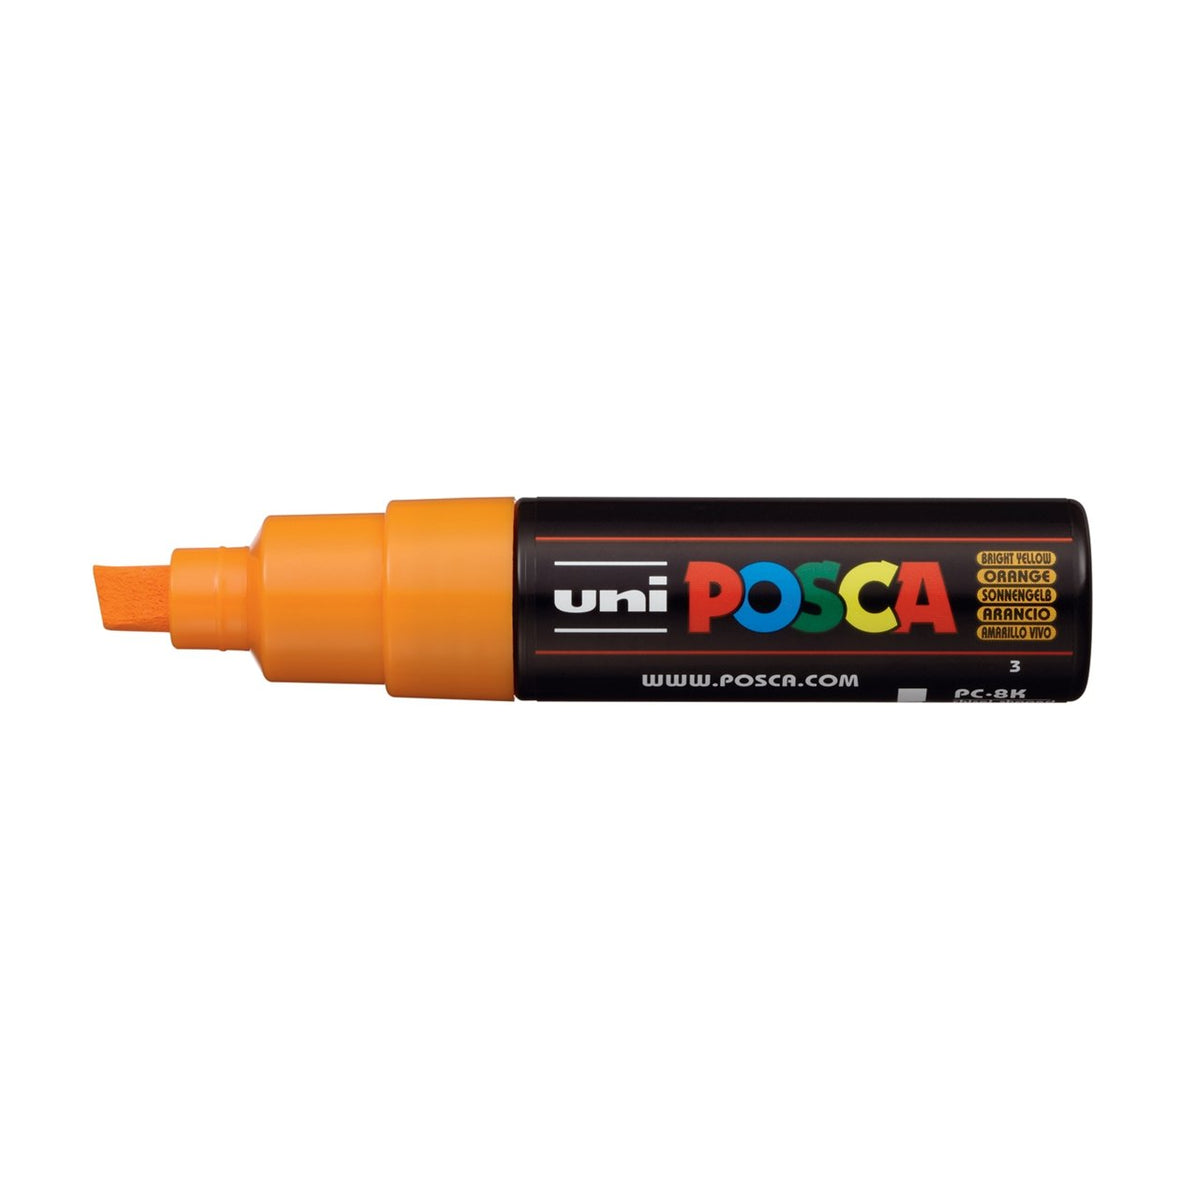 POSCA Paint Markers, Broad Chisel Tip